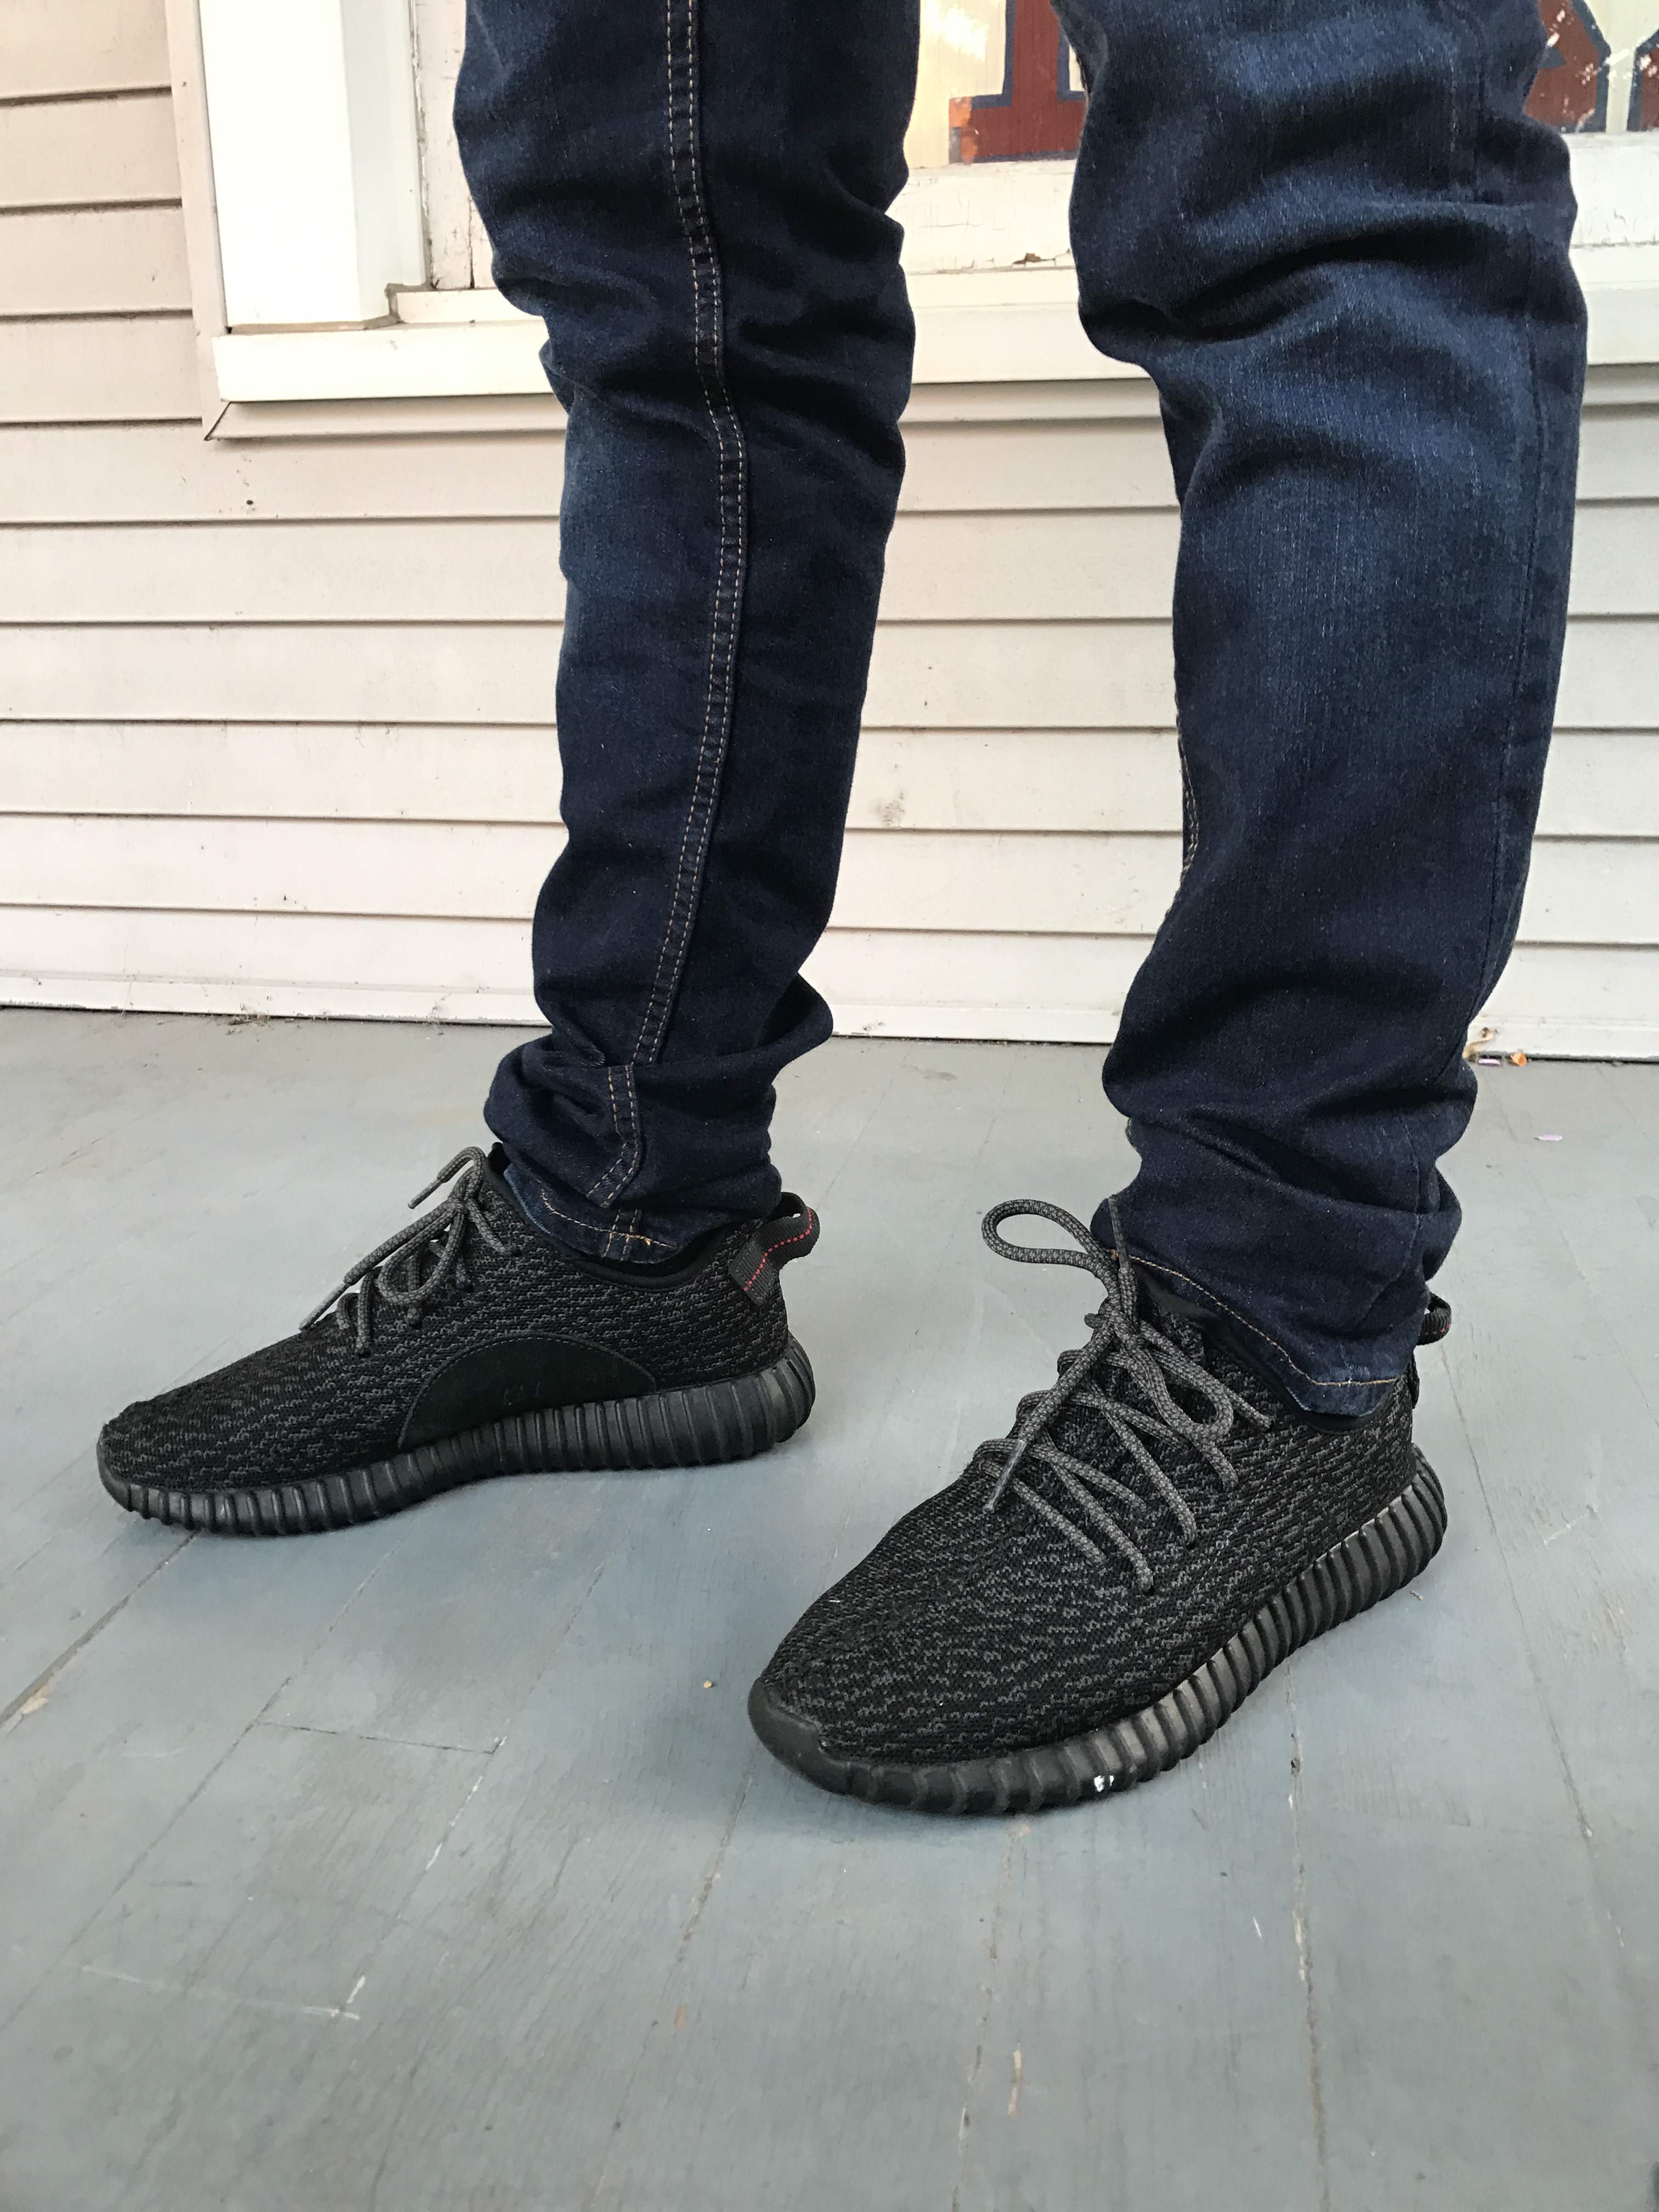 yeezy 350 black with red writing